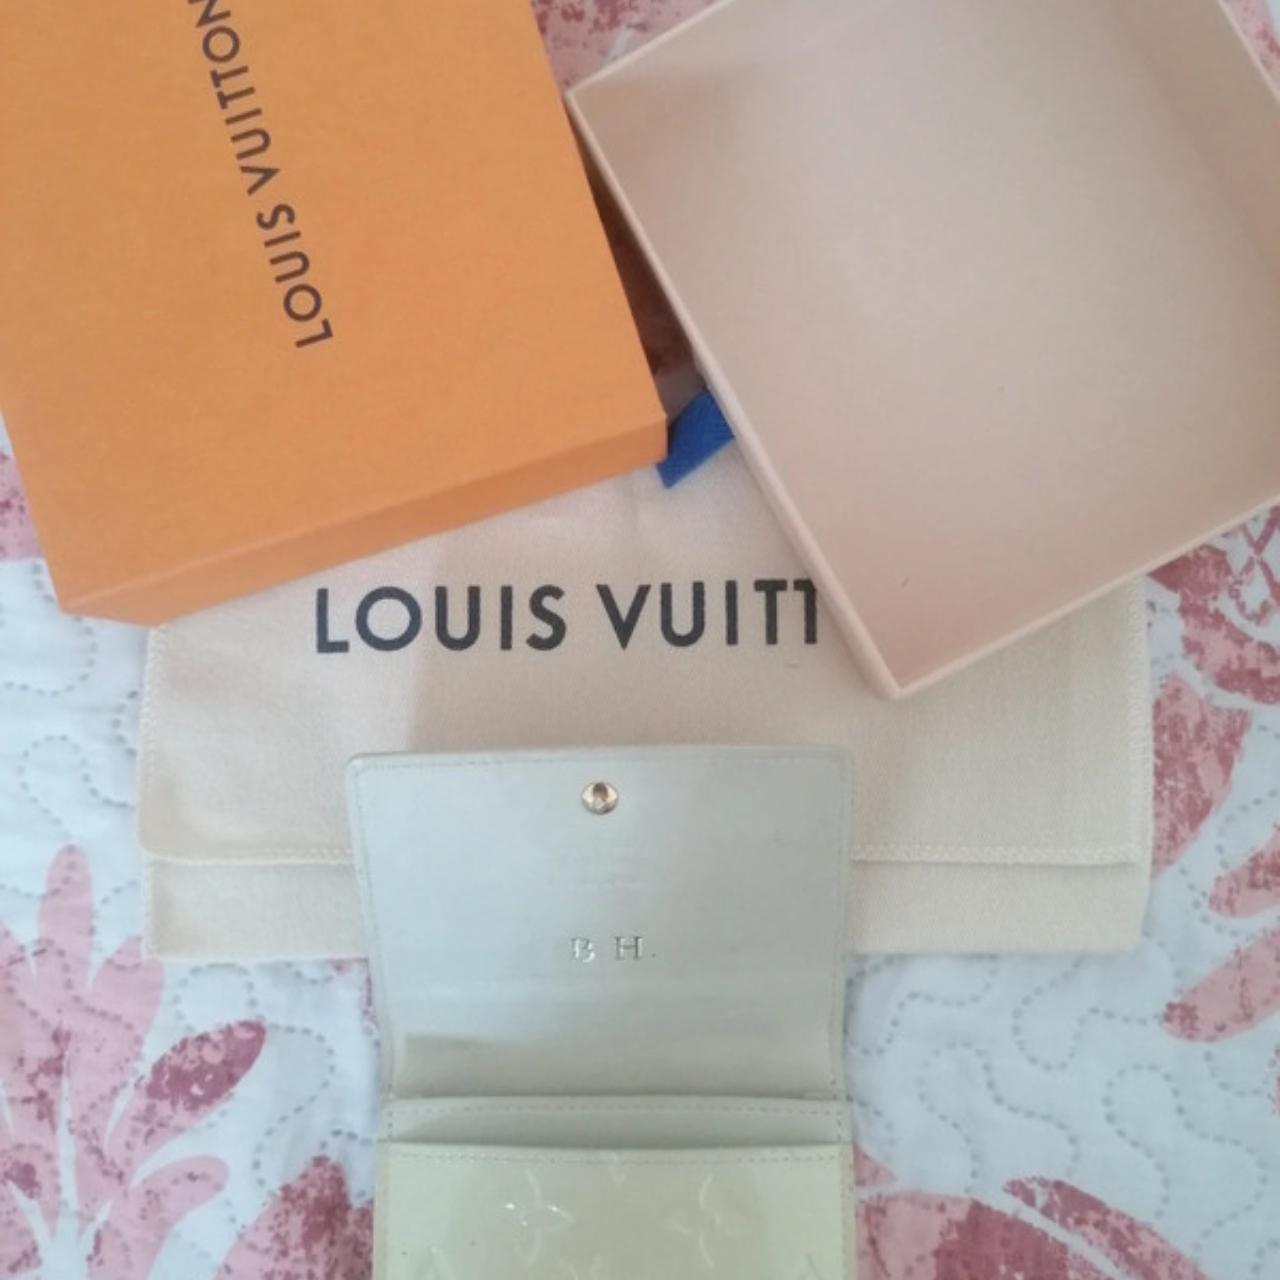 Pre-loved checkered lv wallet is a versatile - Depop